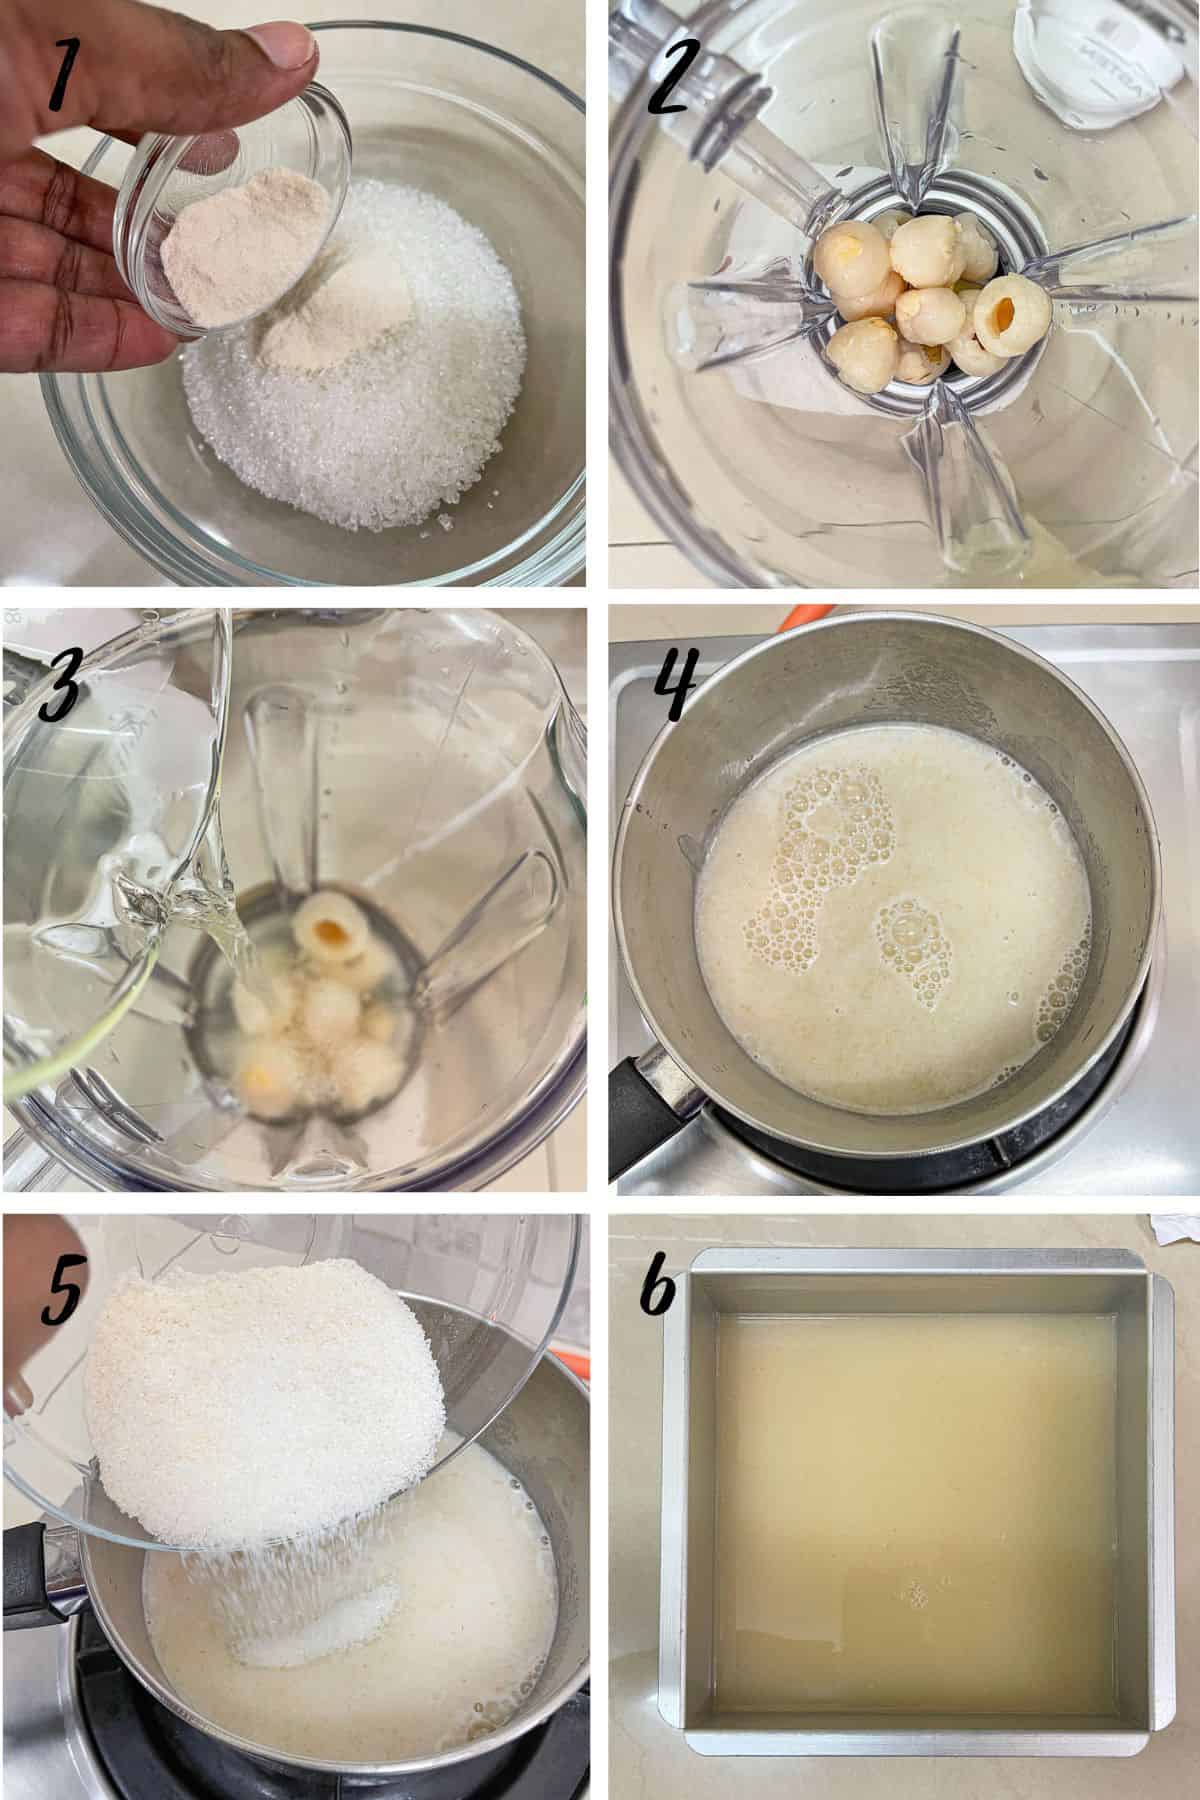 A poster of 6 images showing how to make lychee jelly.